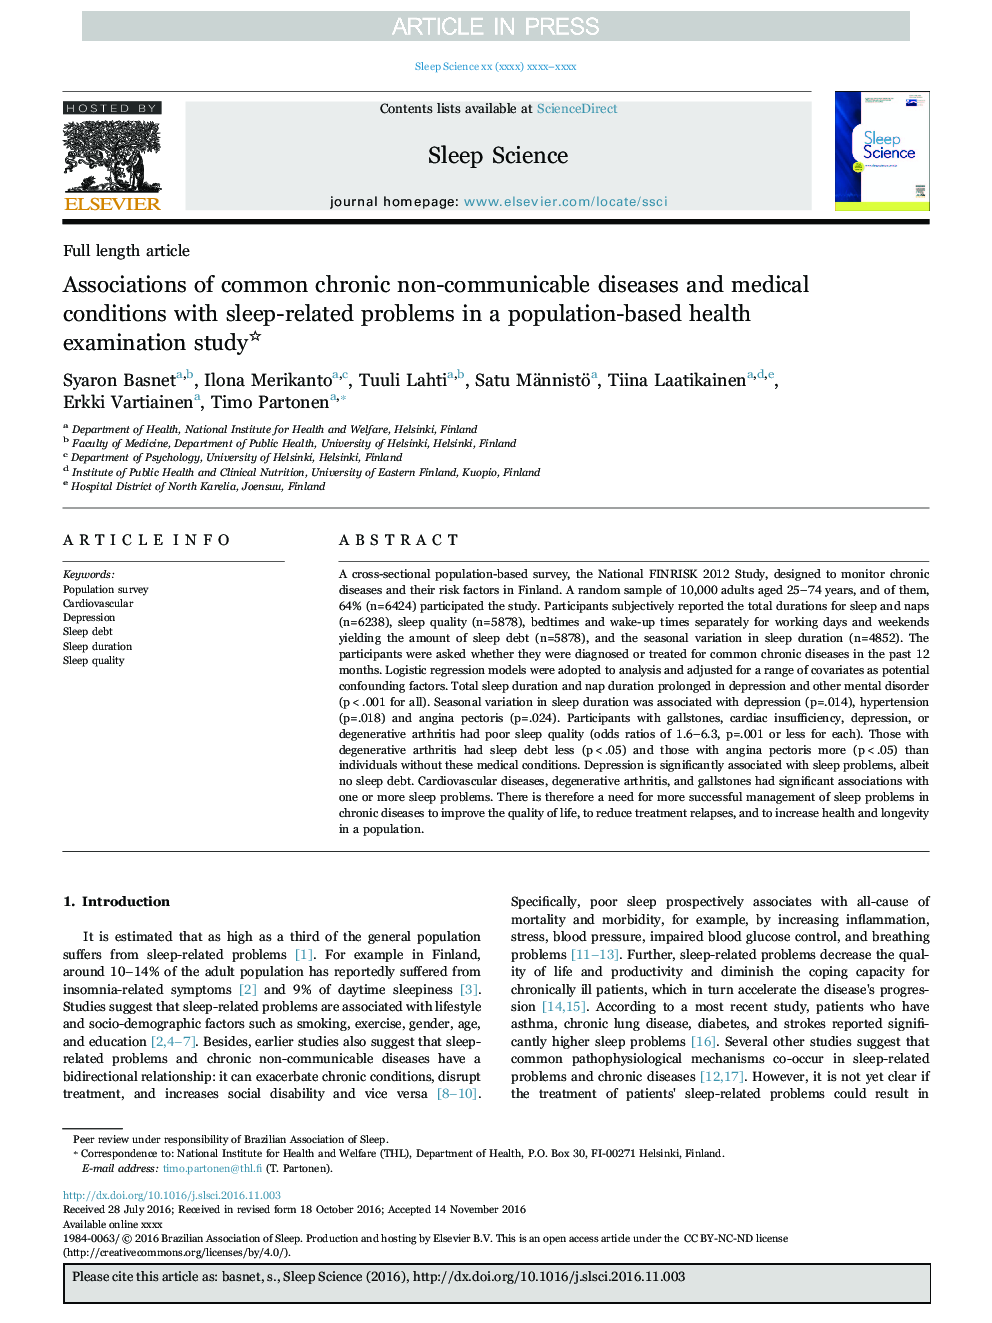 Associations of common chronic non-communicable diseases and medical conditions with sleep-related problems in a population-based health examination study